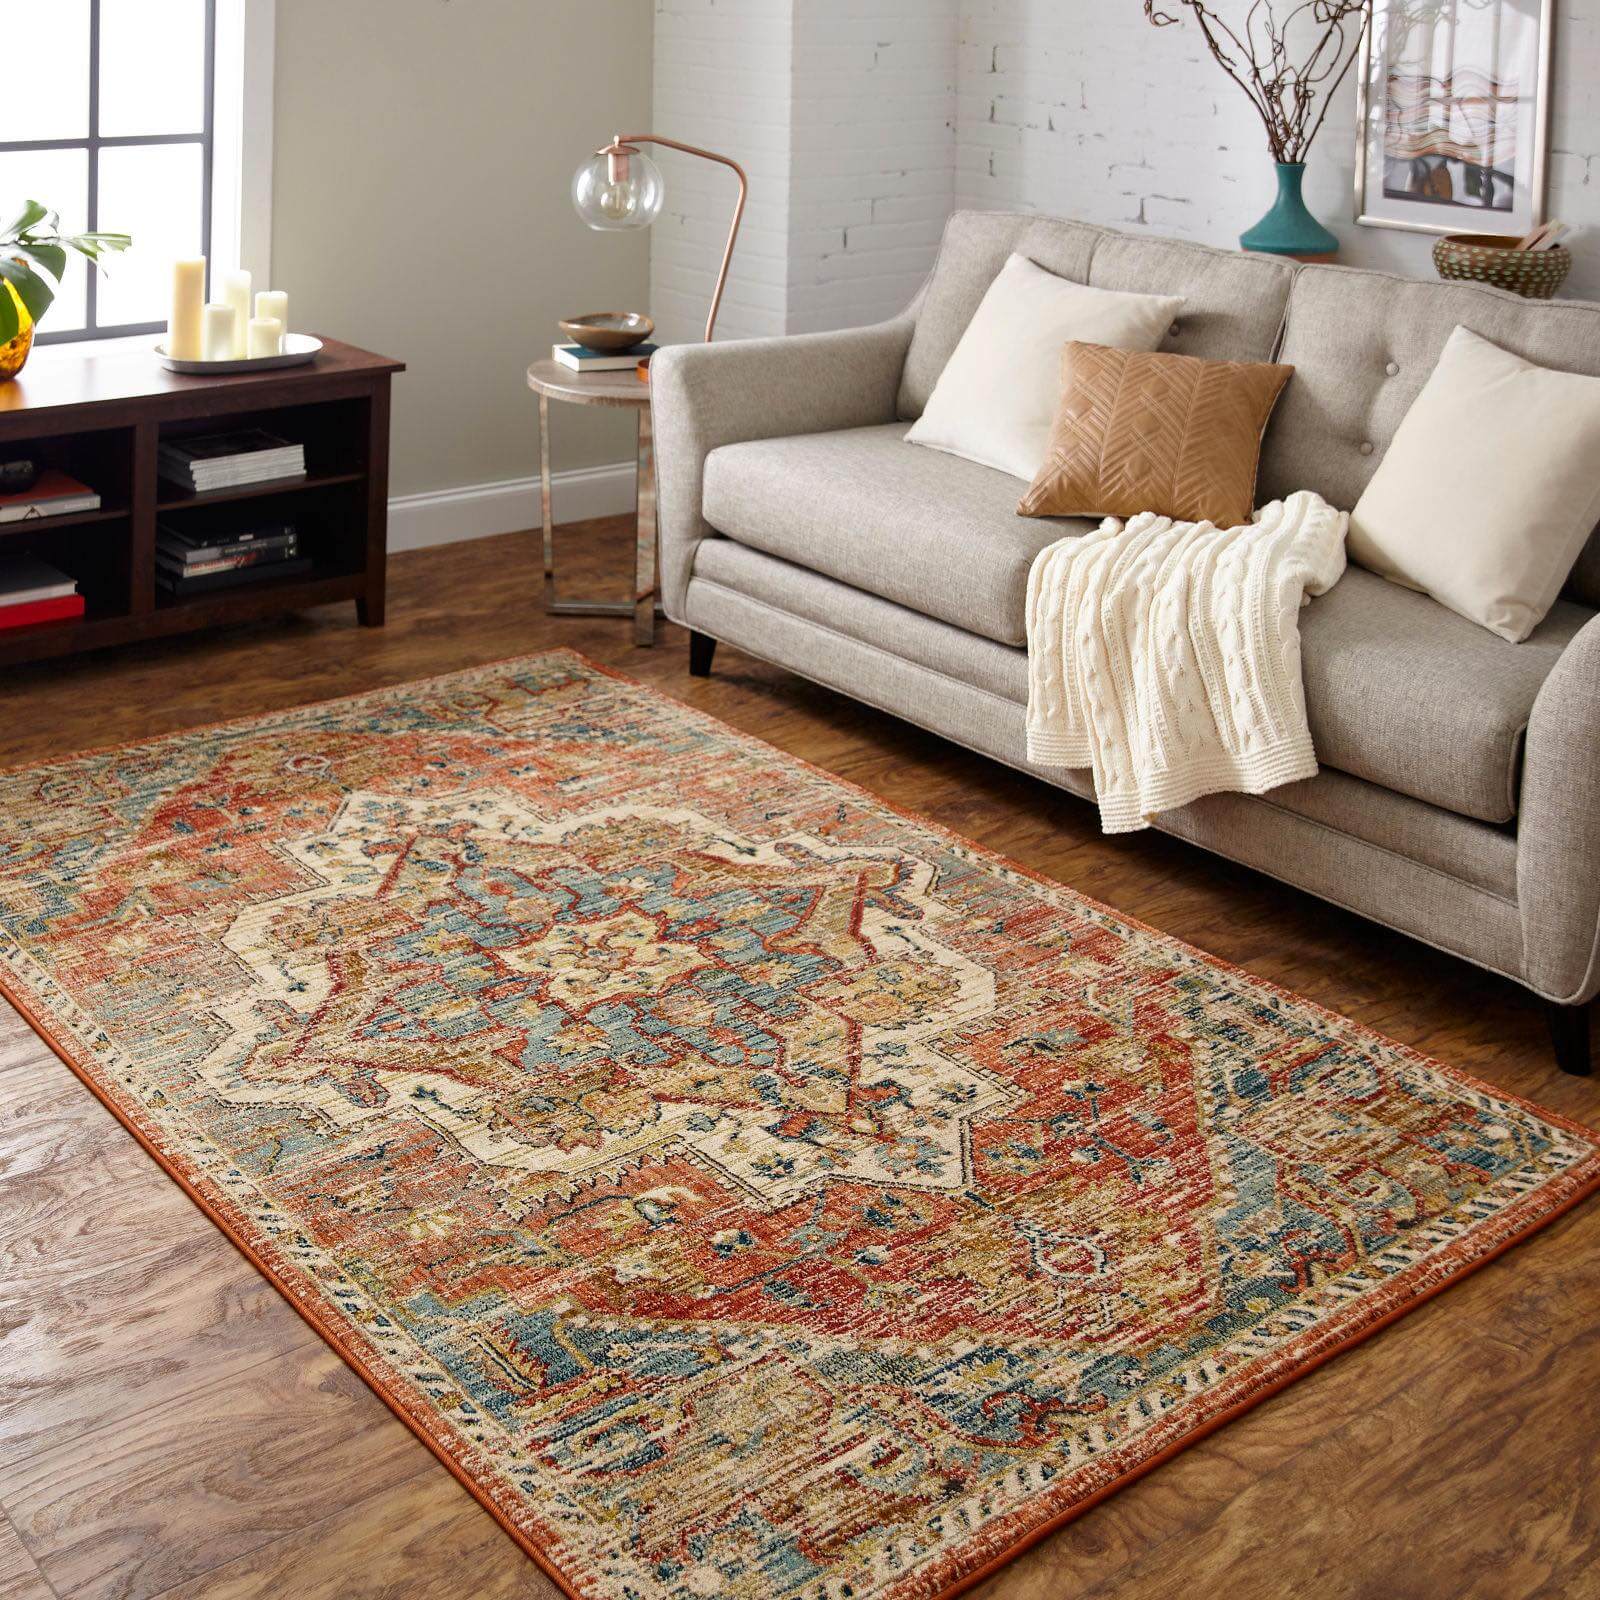 Area Rug | The Carpet Guy